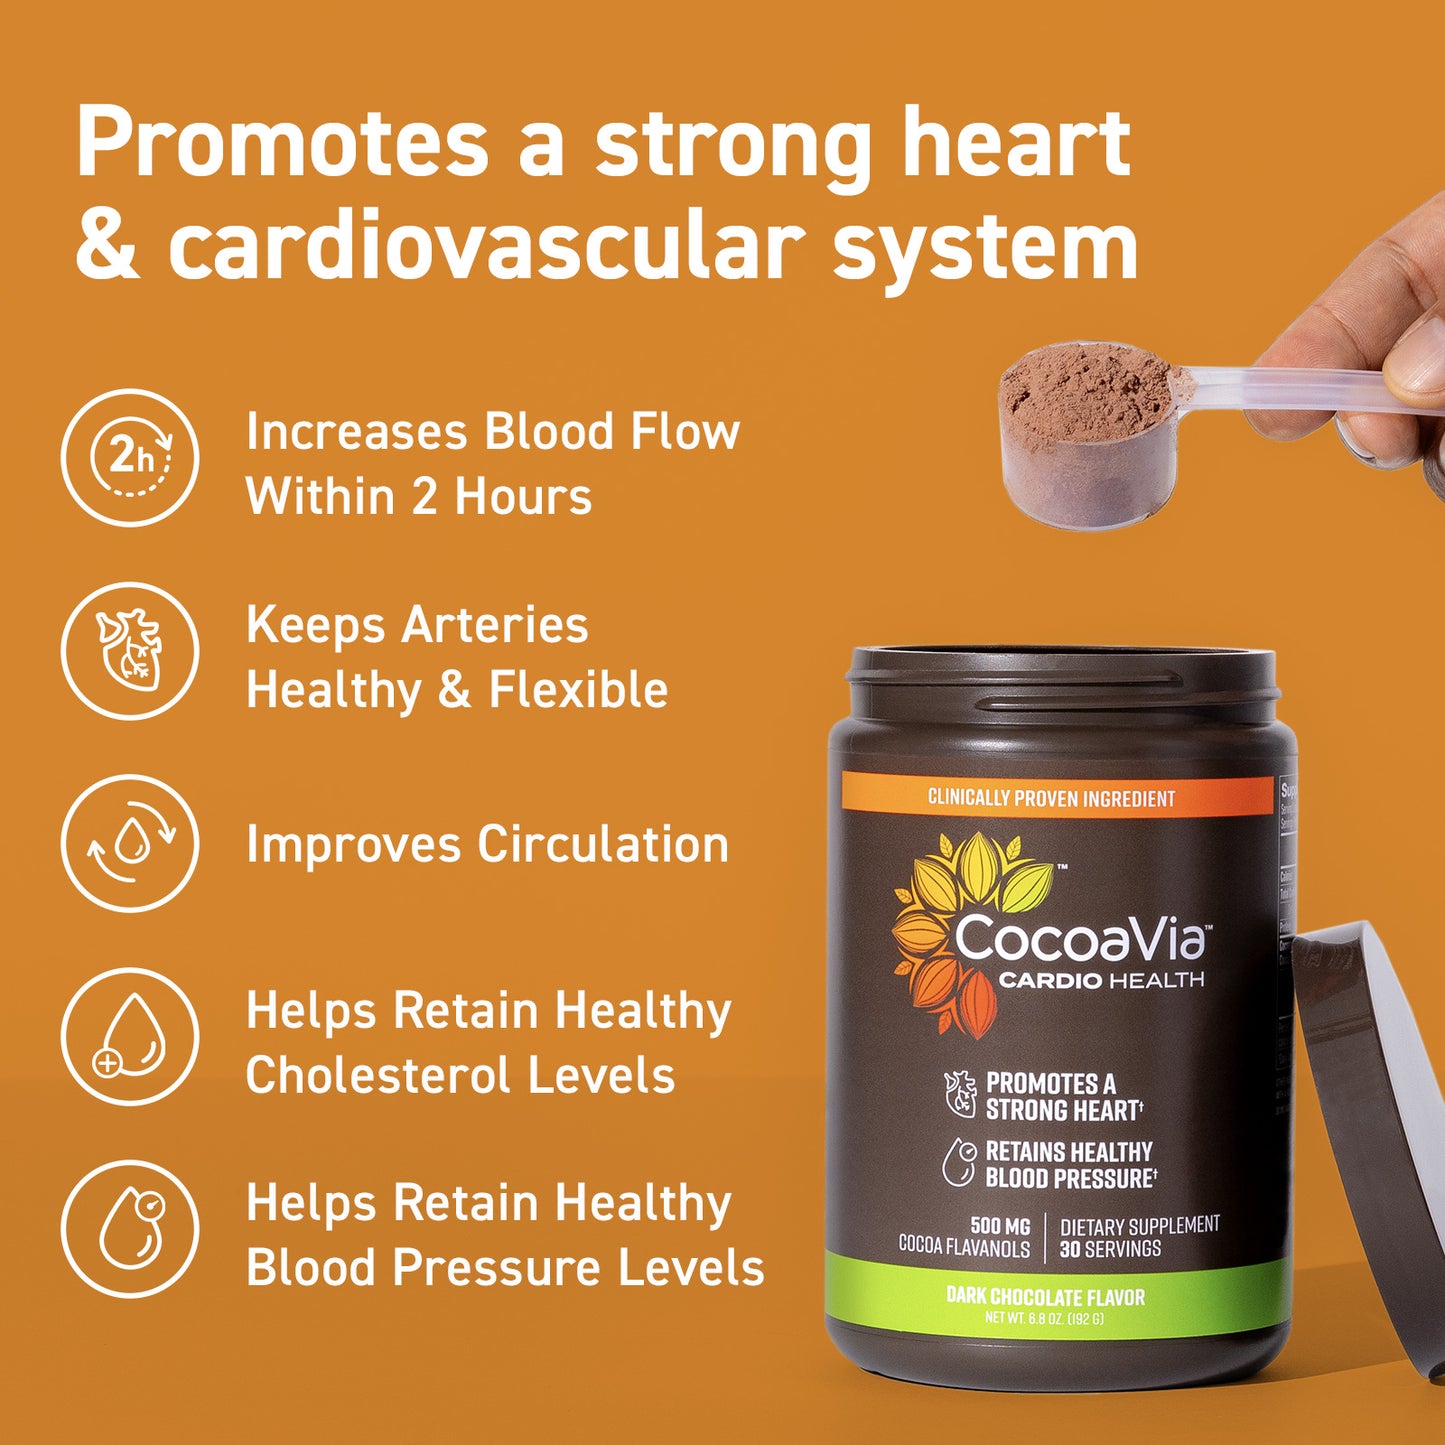 Promotes a strong heart & cardiovascular system. Increases Blood Flow within 2 hours. Improves circulation. Helps retain healthy cholsterol levels. Keeps arteries healthy & flexible. 